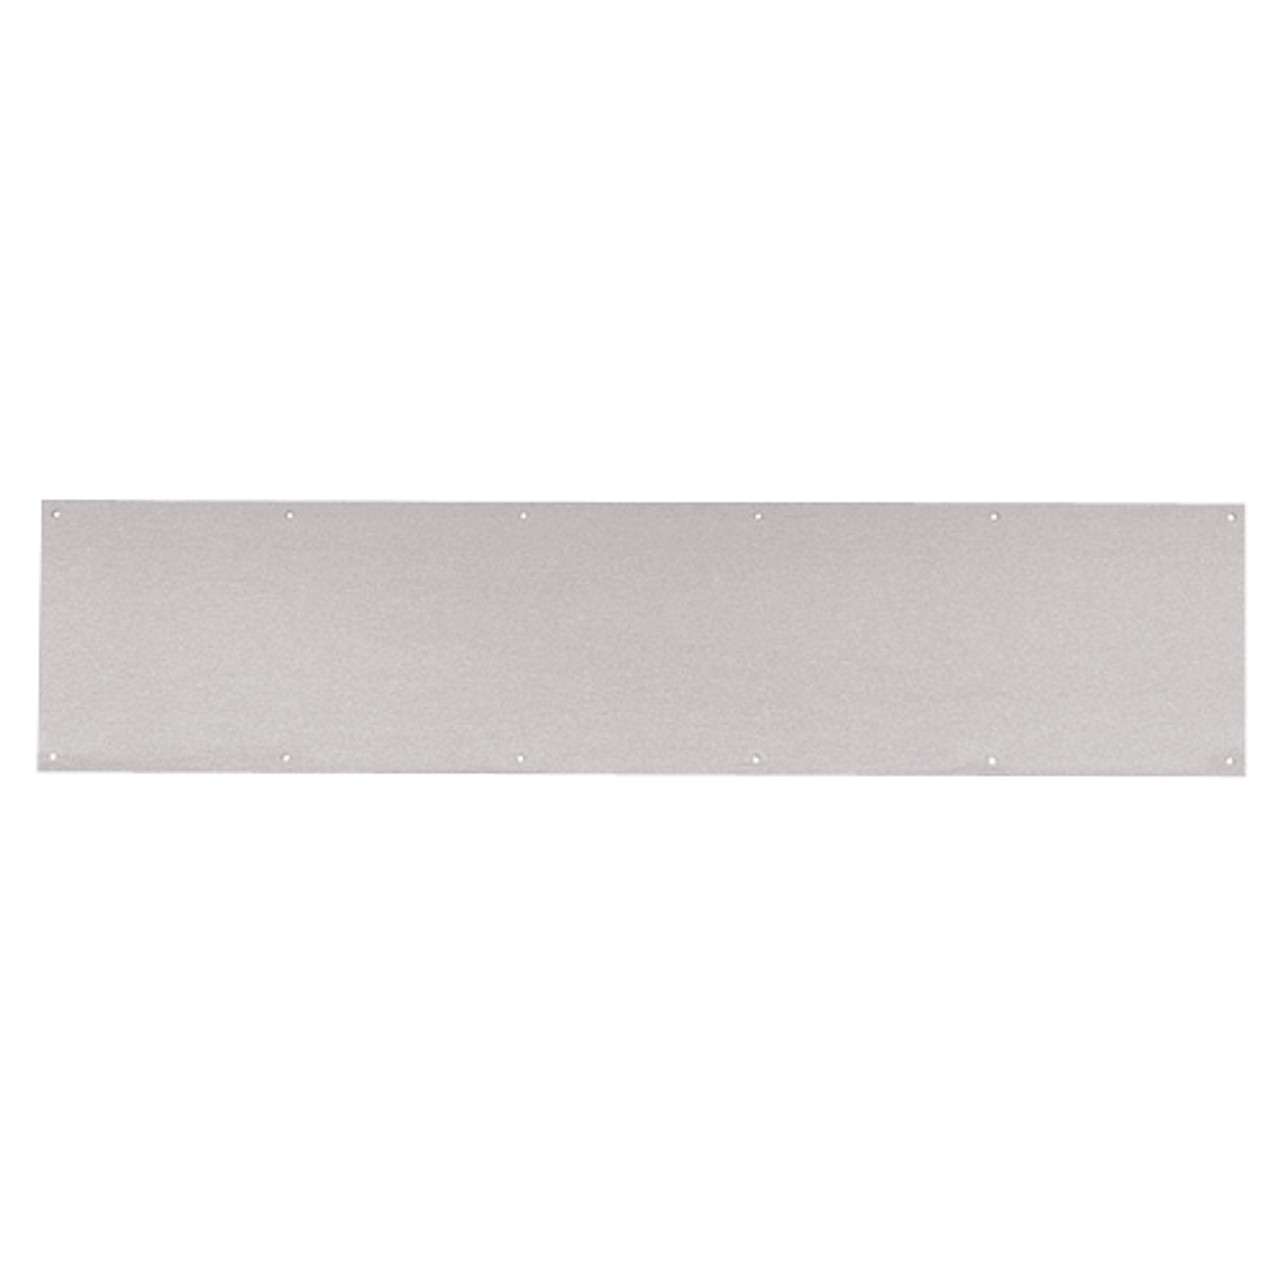 8400-US32D-28x40-B-CS Ives 8400 Series Protection Plate in Satin Stainless Steel